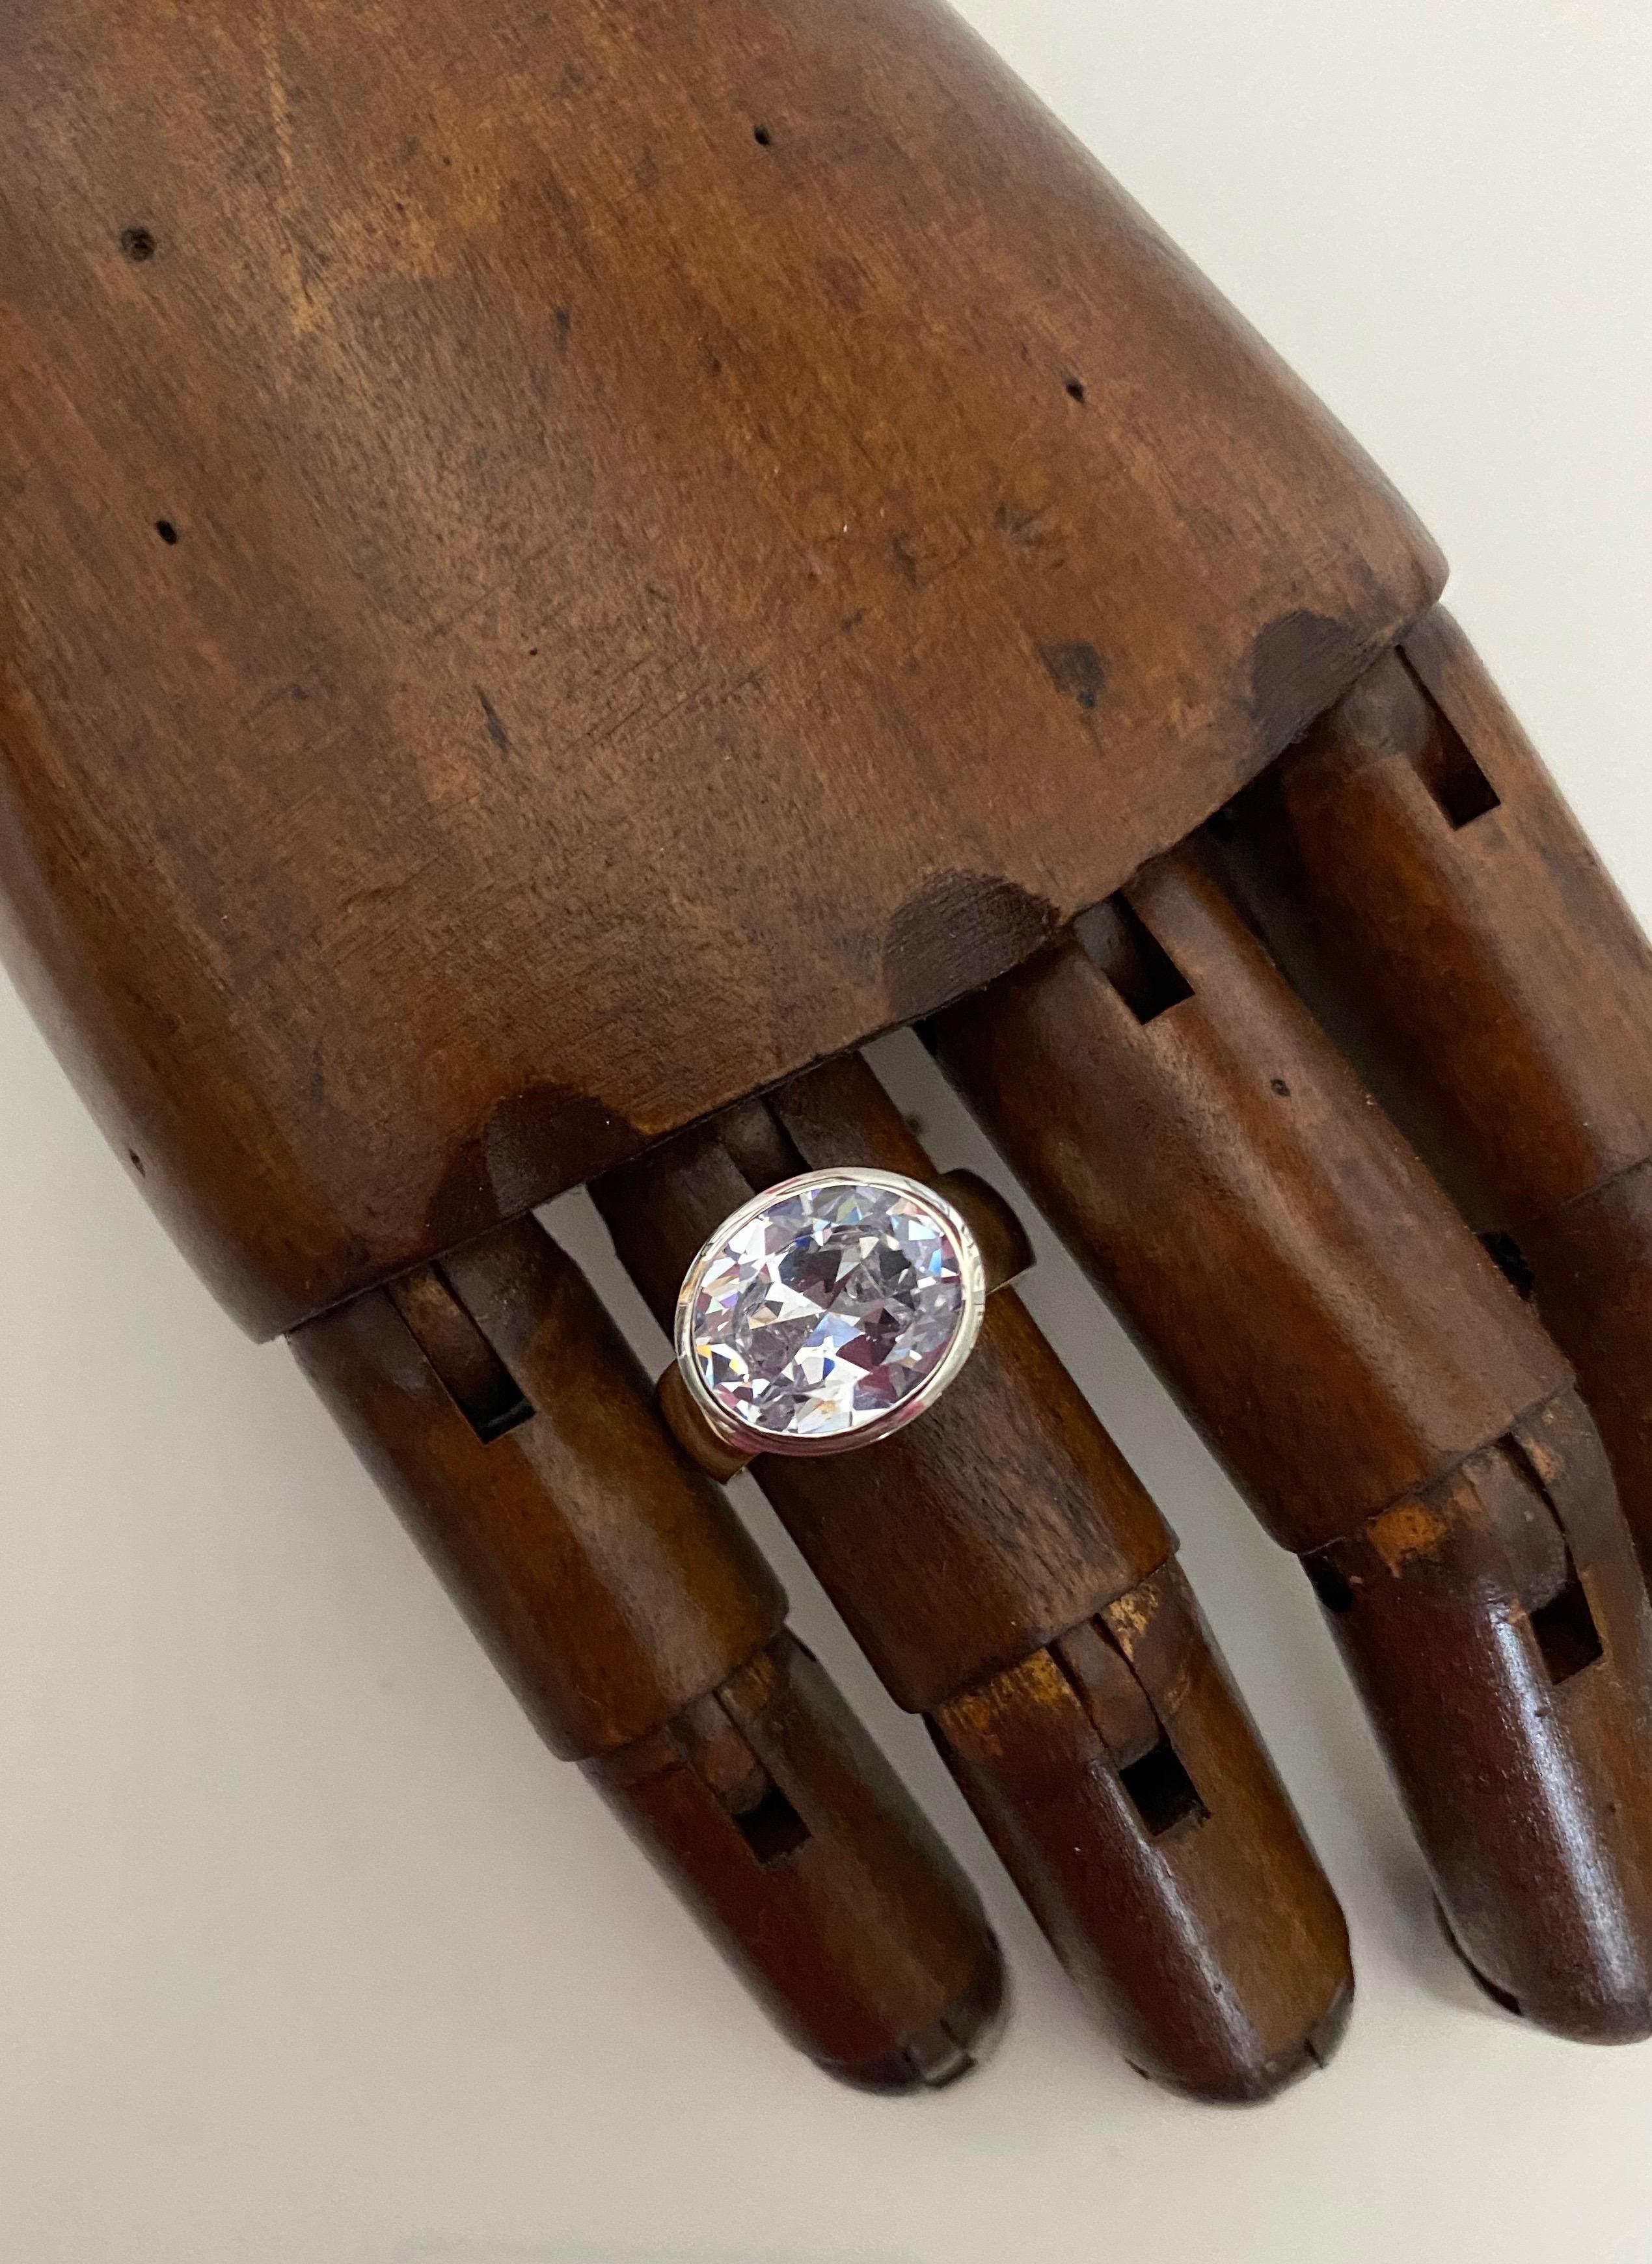 An oval cut silver sapphire of 5.63 carats is bezel set in this two-tone, 18k gold Leah ring.  This variation of the Leah features the gem set across the finger.  Expertly finished, the sapphire is well cut, polished and is completely colorless. 